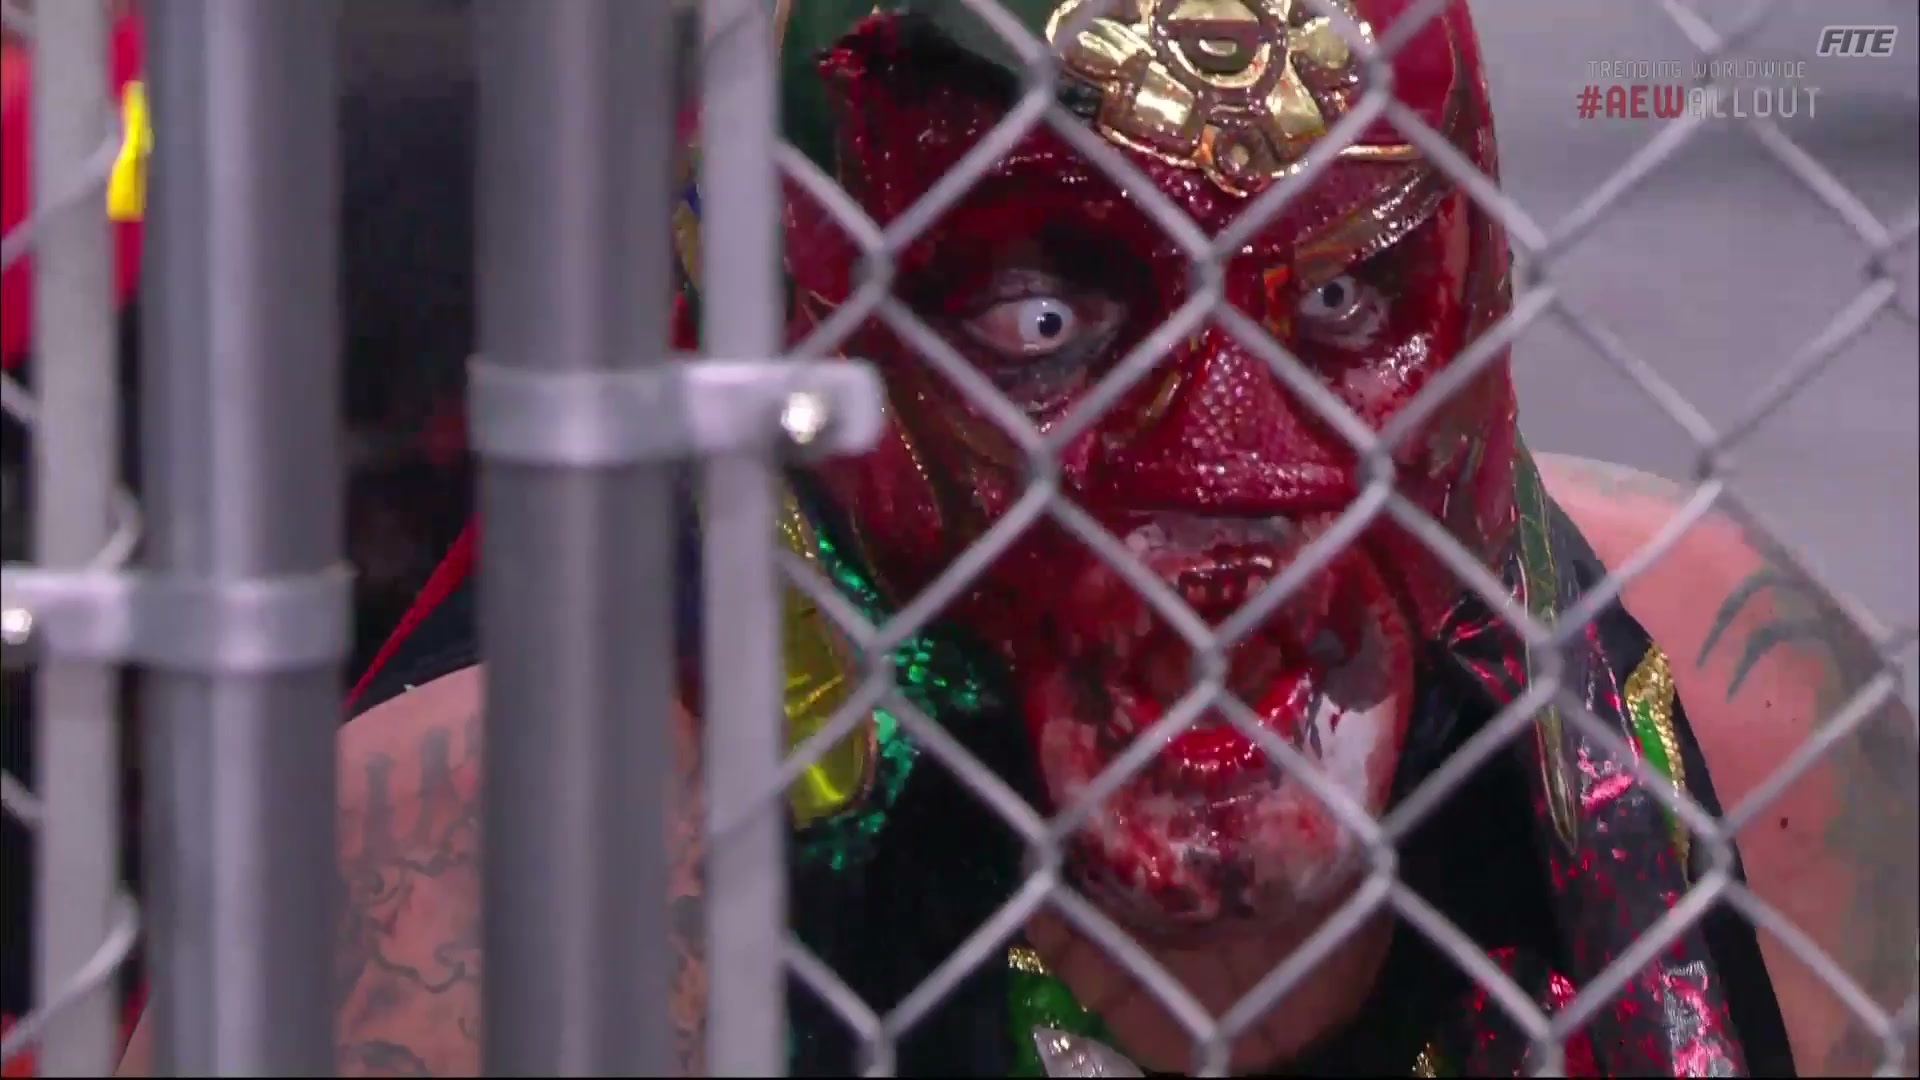 Penta El Zero Miedo covered in blood at AEW All Out